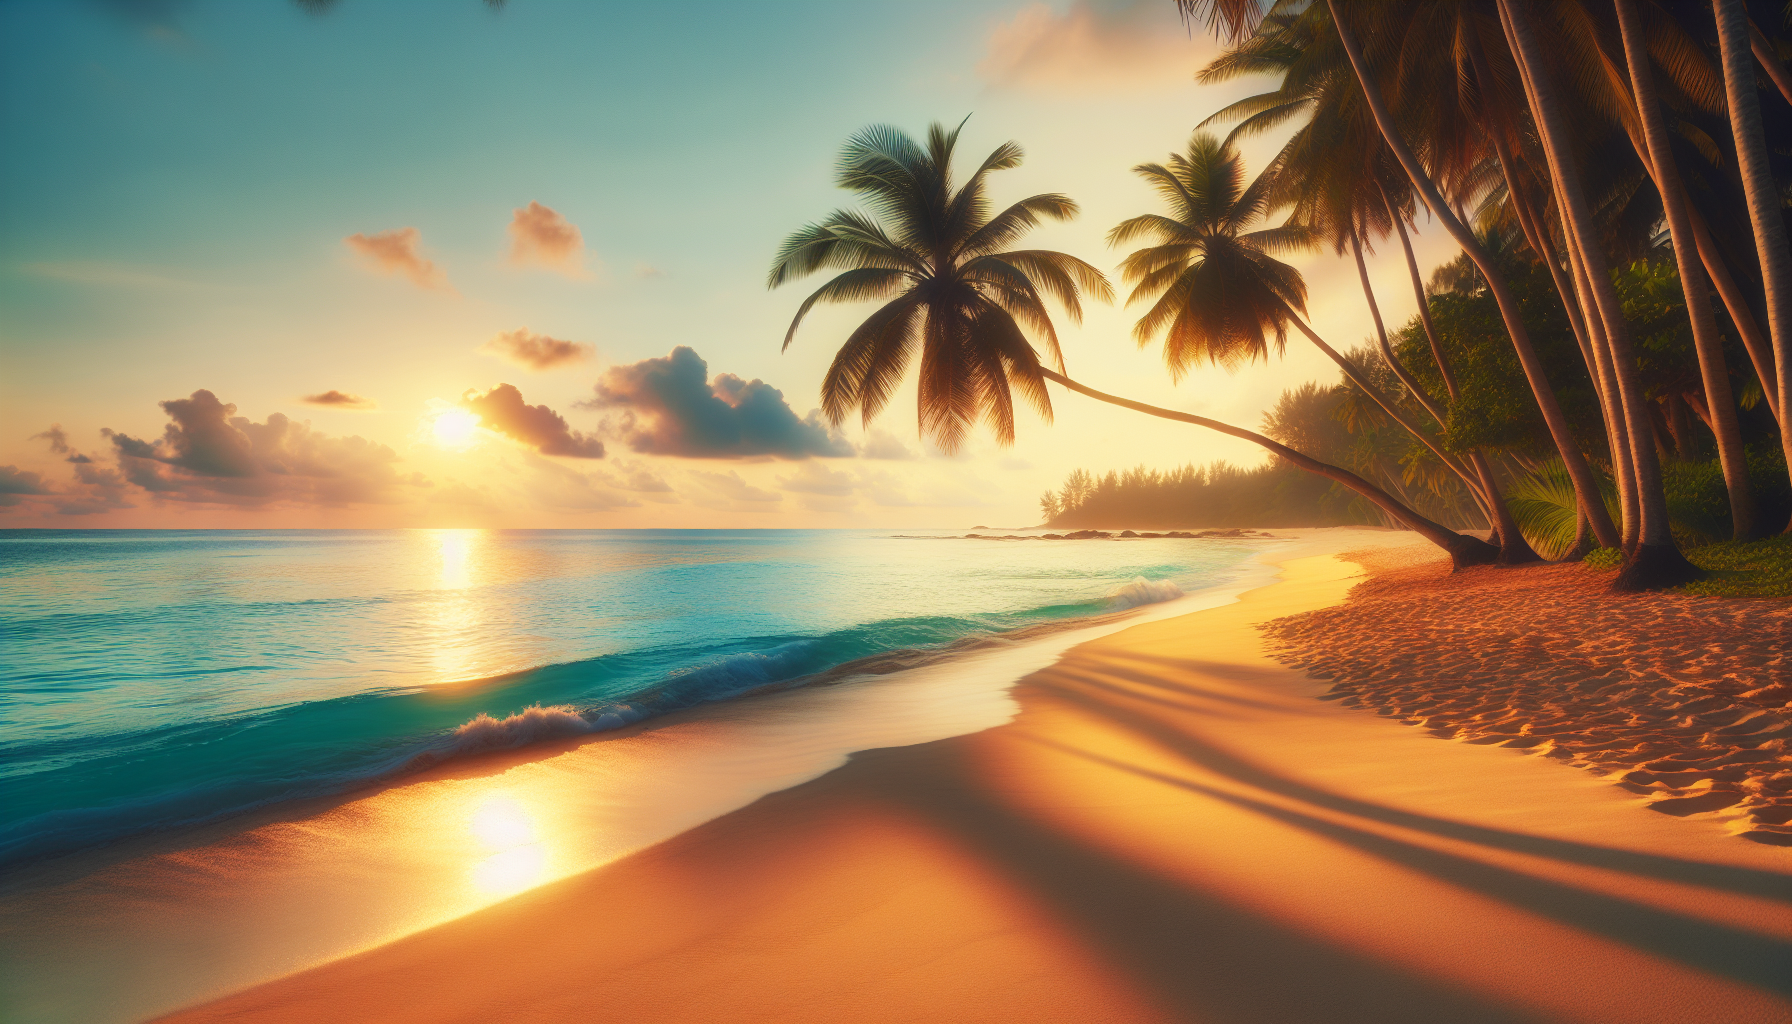 Sandy beach with palm trees and ocean waves